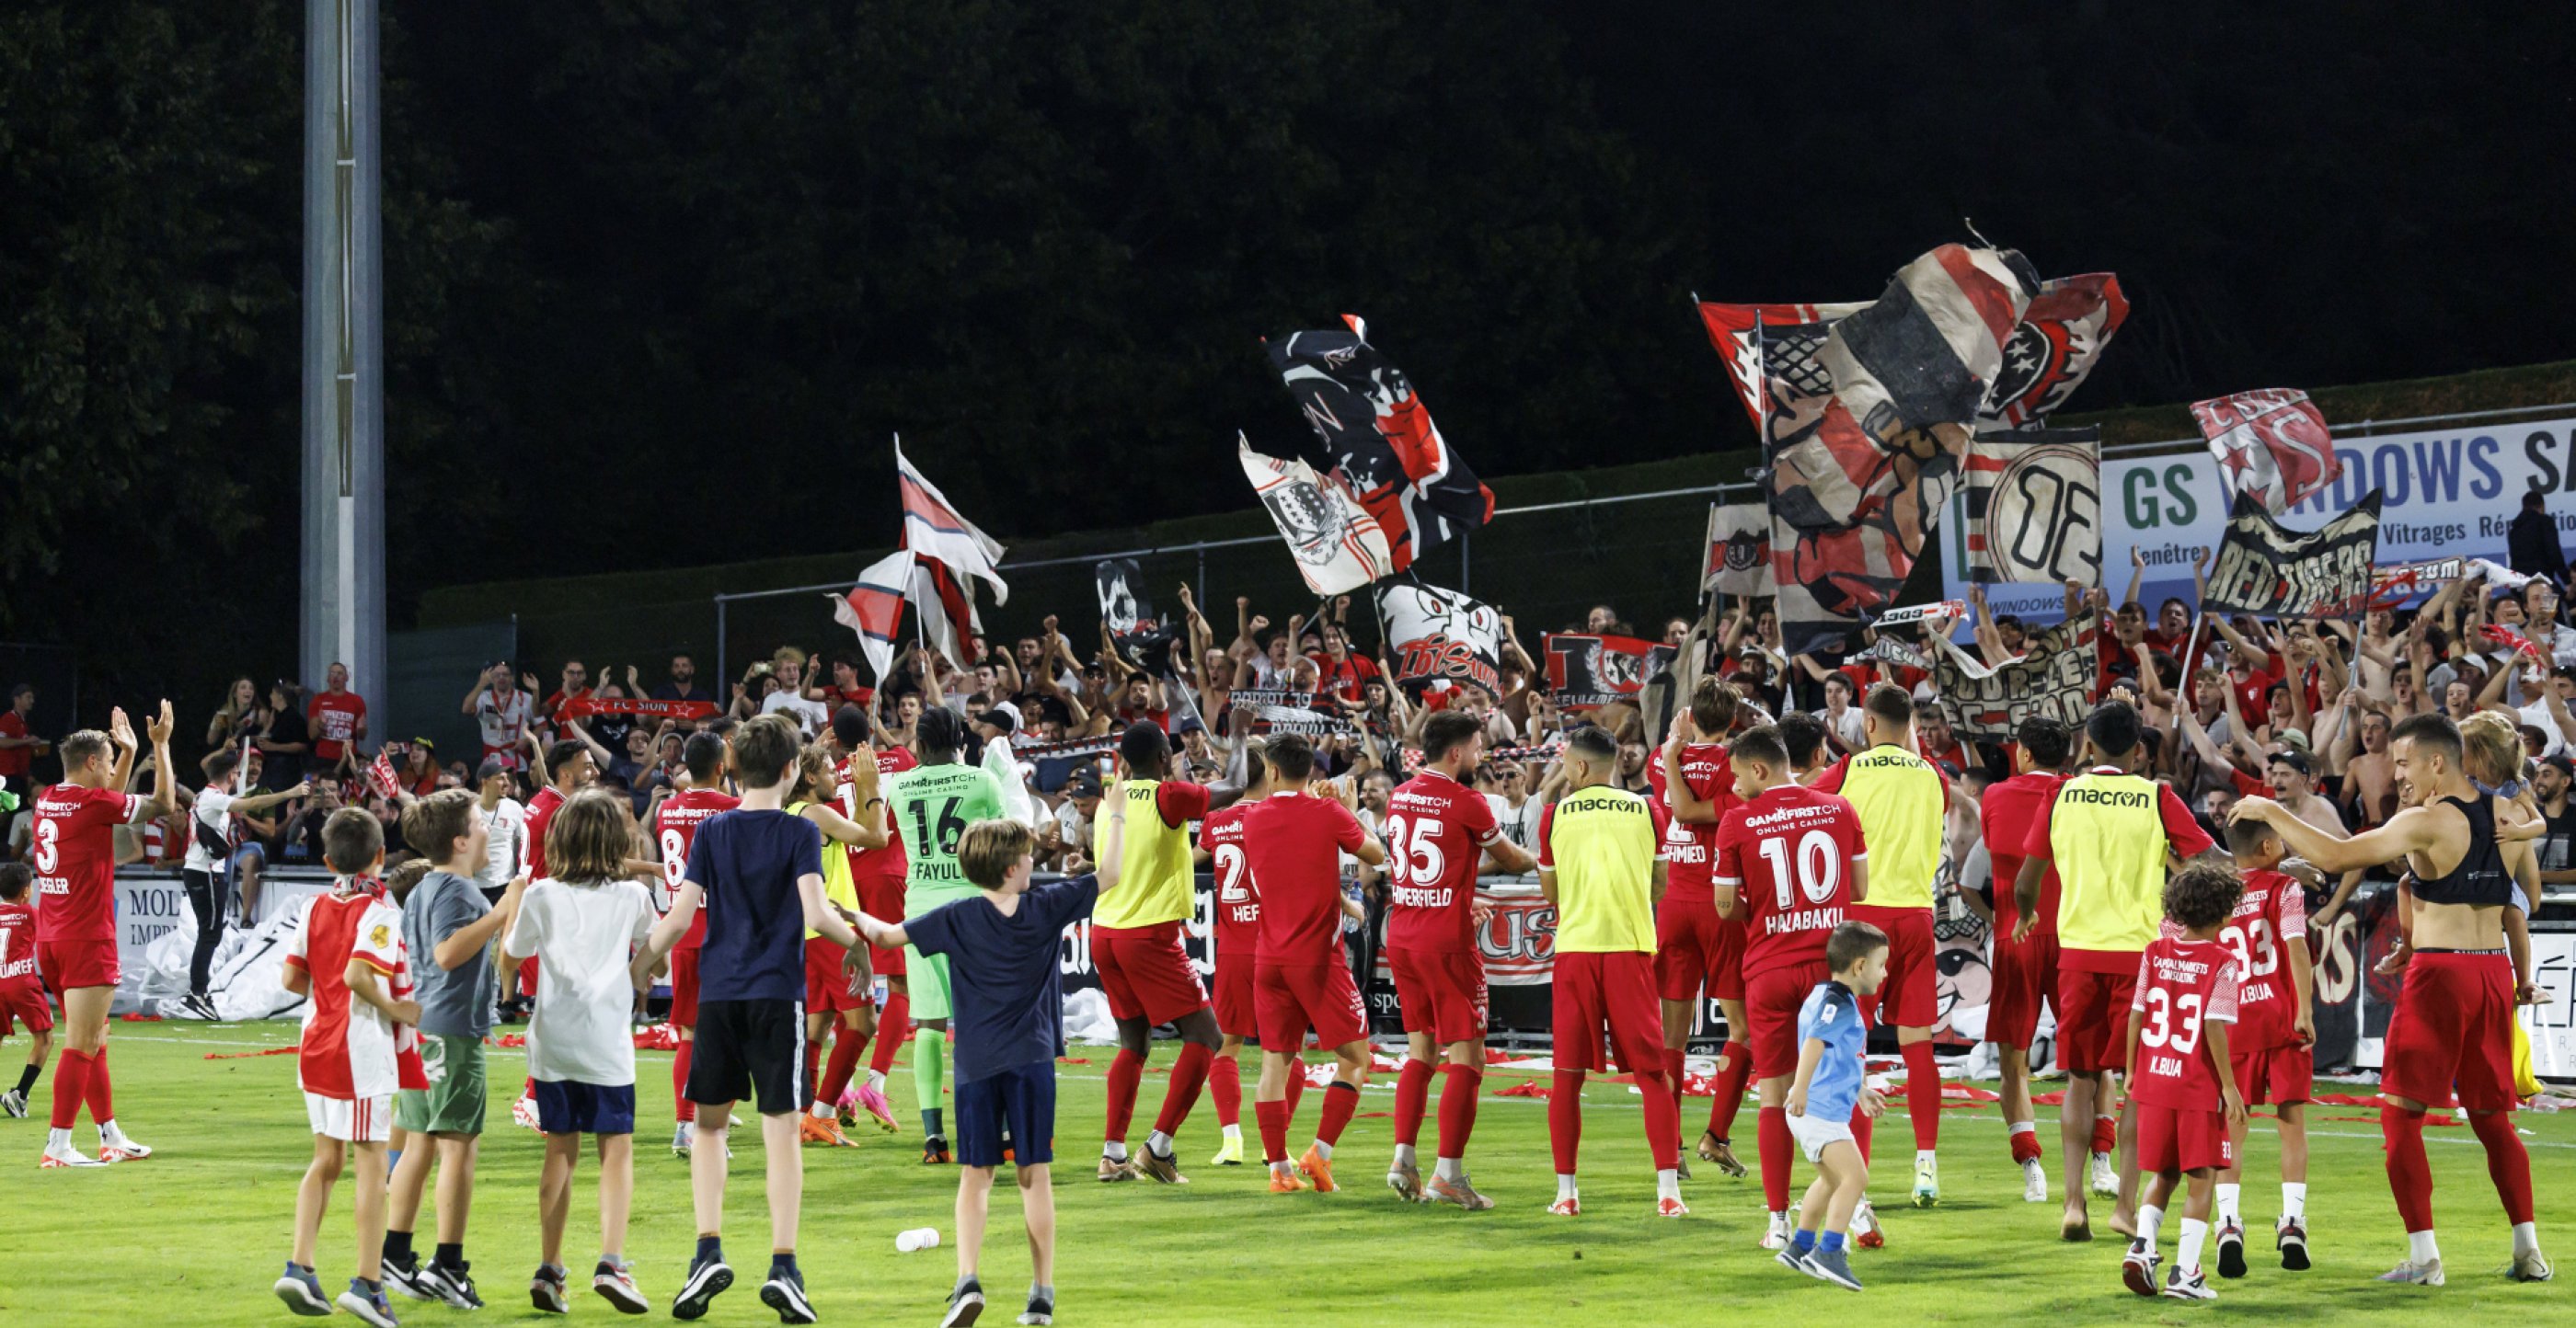 Sion's players celebrate with supporter after defeating the team Stade Nyonnais, during the Challenge League soccer match of Swiss Championship between FC Stade Nyonnais and FC Sion, at the Stade de la Colovray, in Neuchatel, Switzerland, Friday, August 25, 2023. (KEYSTONE/Salvatore Di Nolfi)